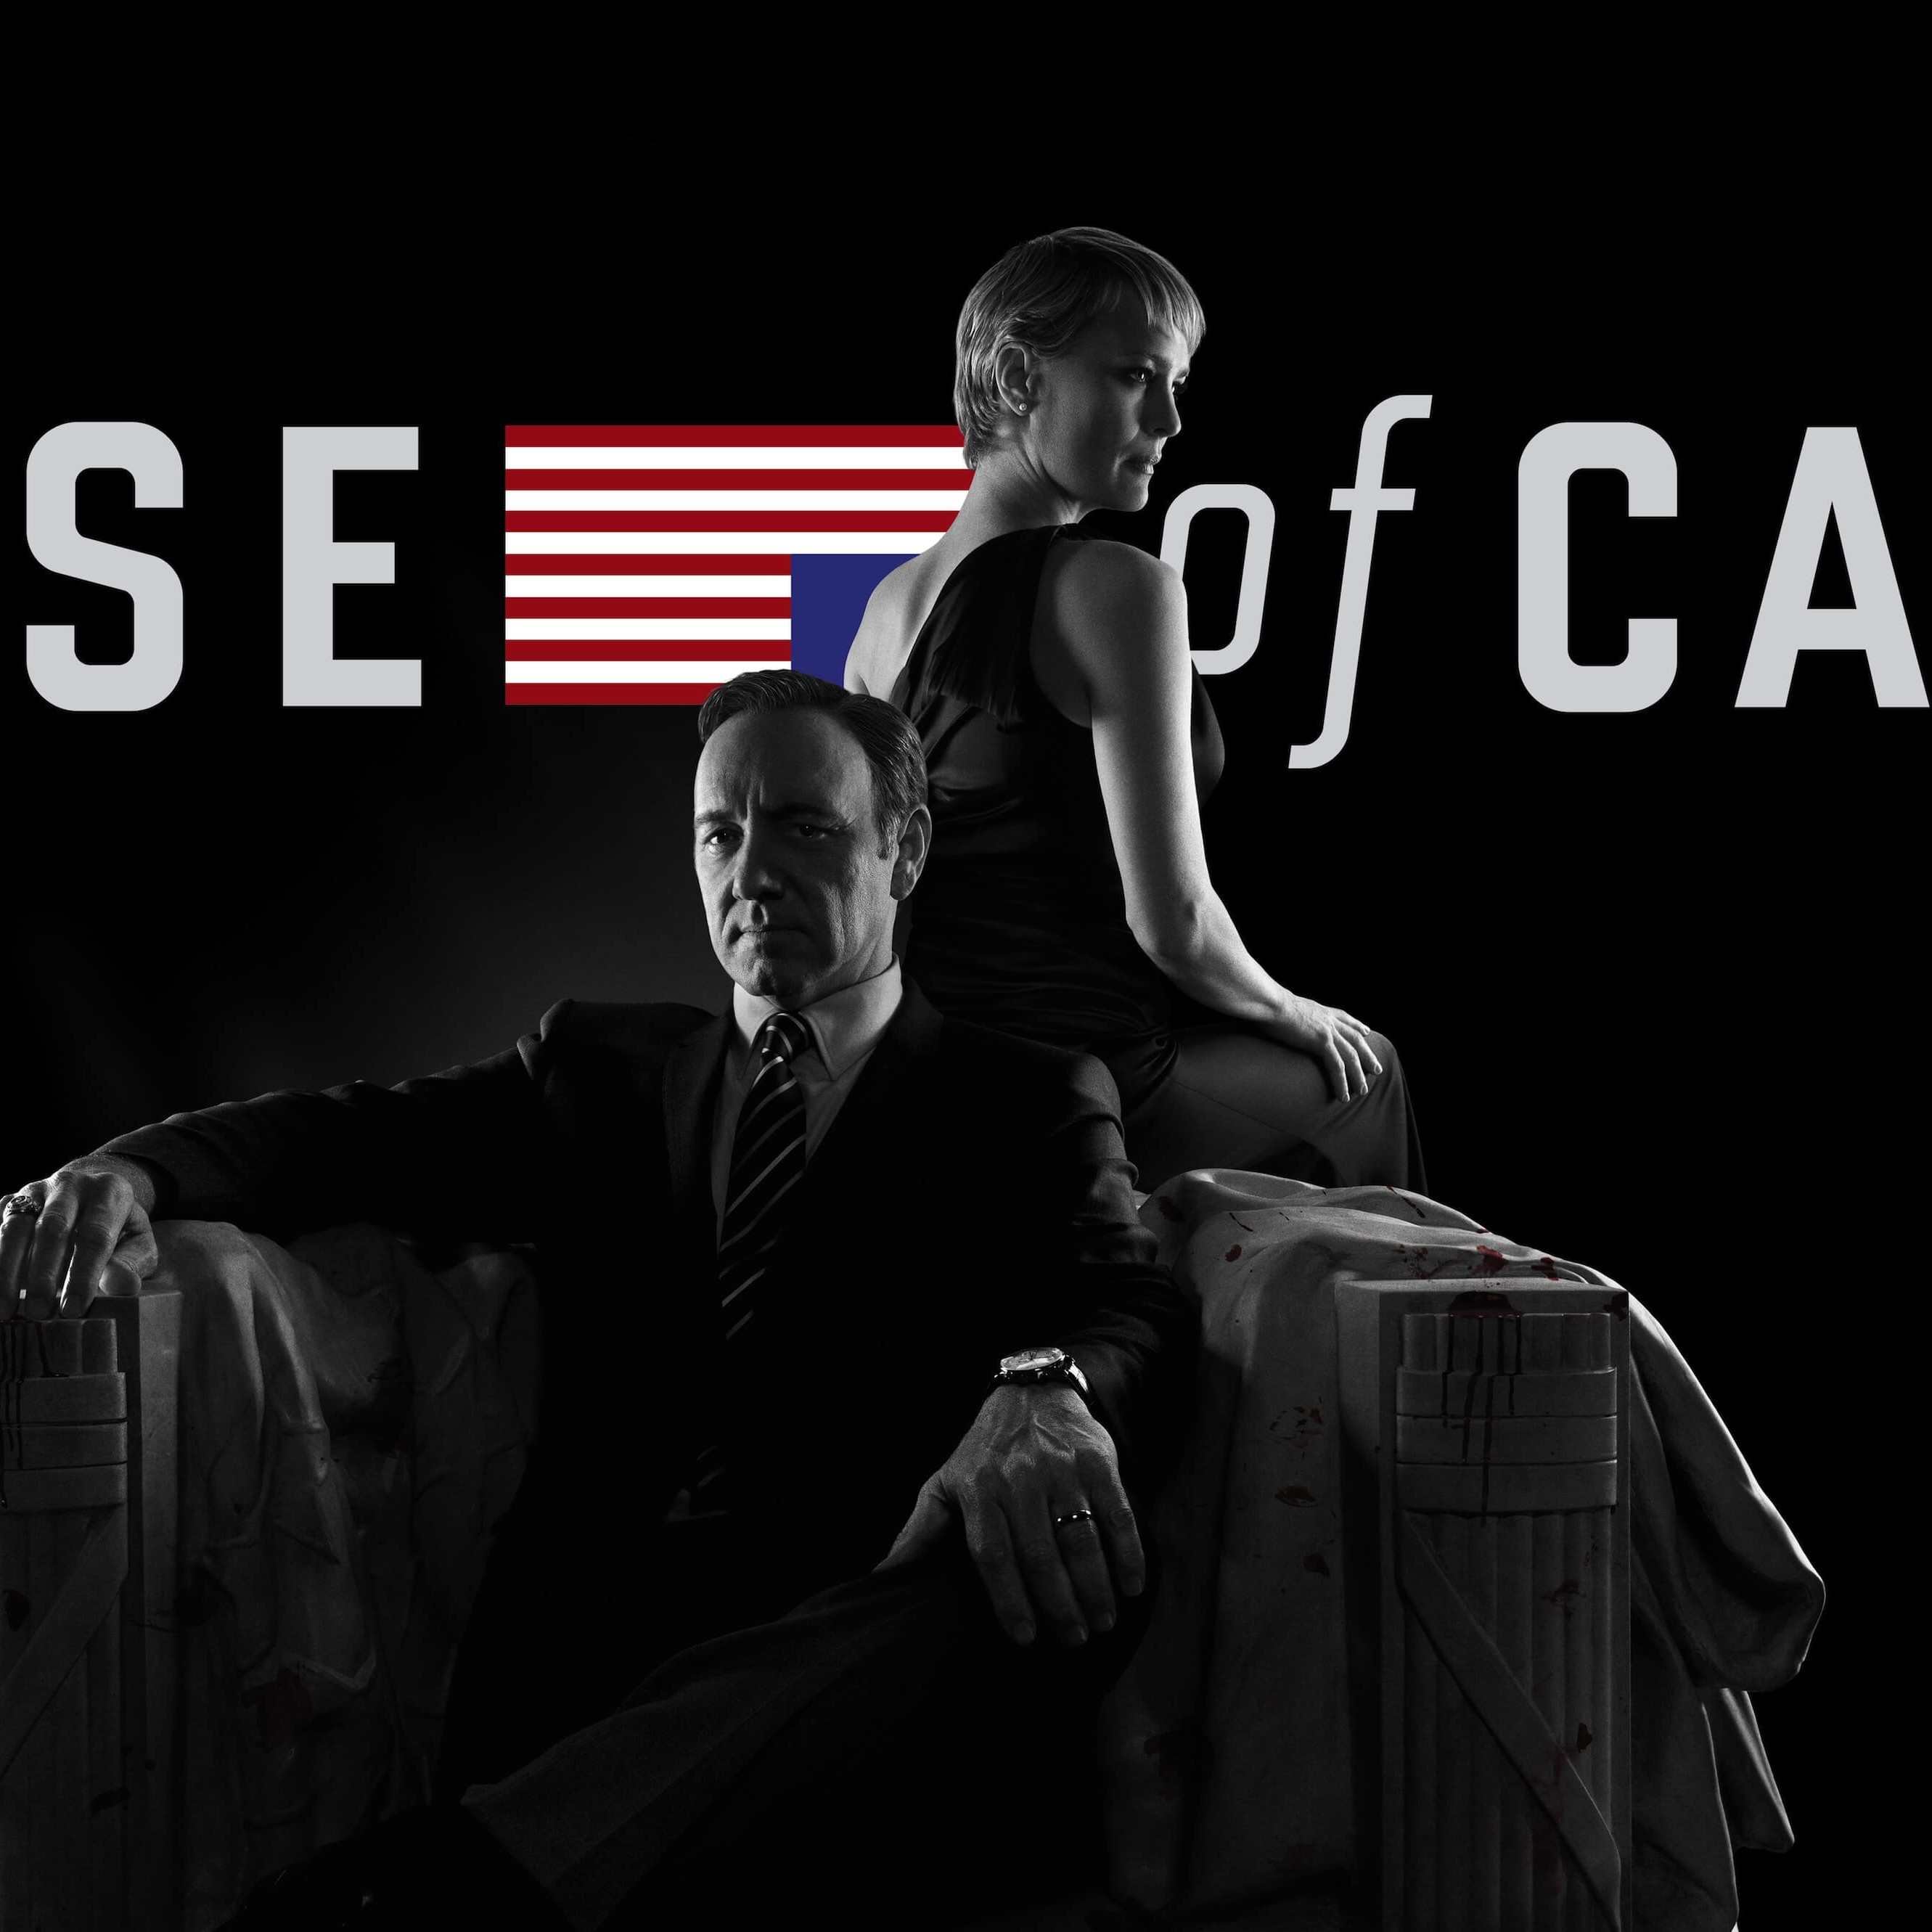 House of Cards - Black & White Wallpaper for Apple iPhone 6 Plus